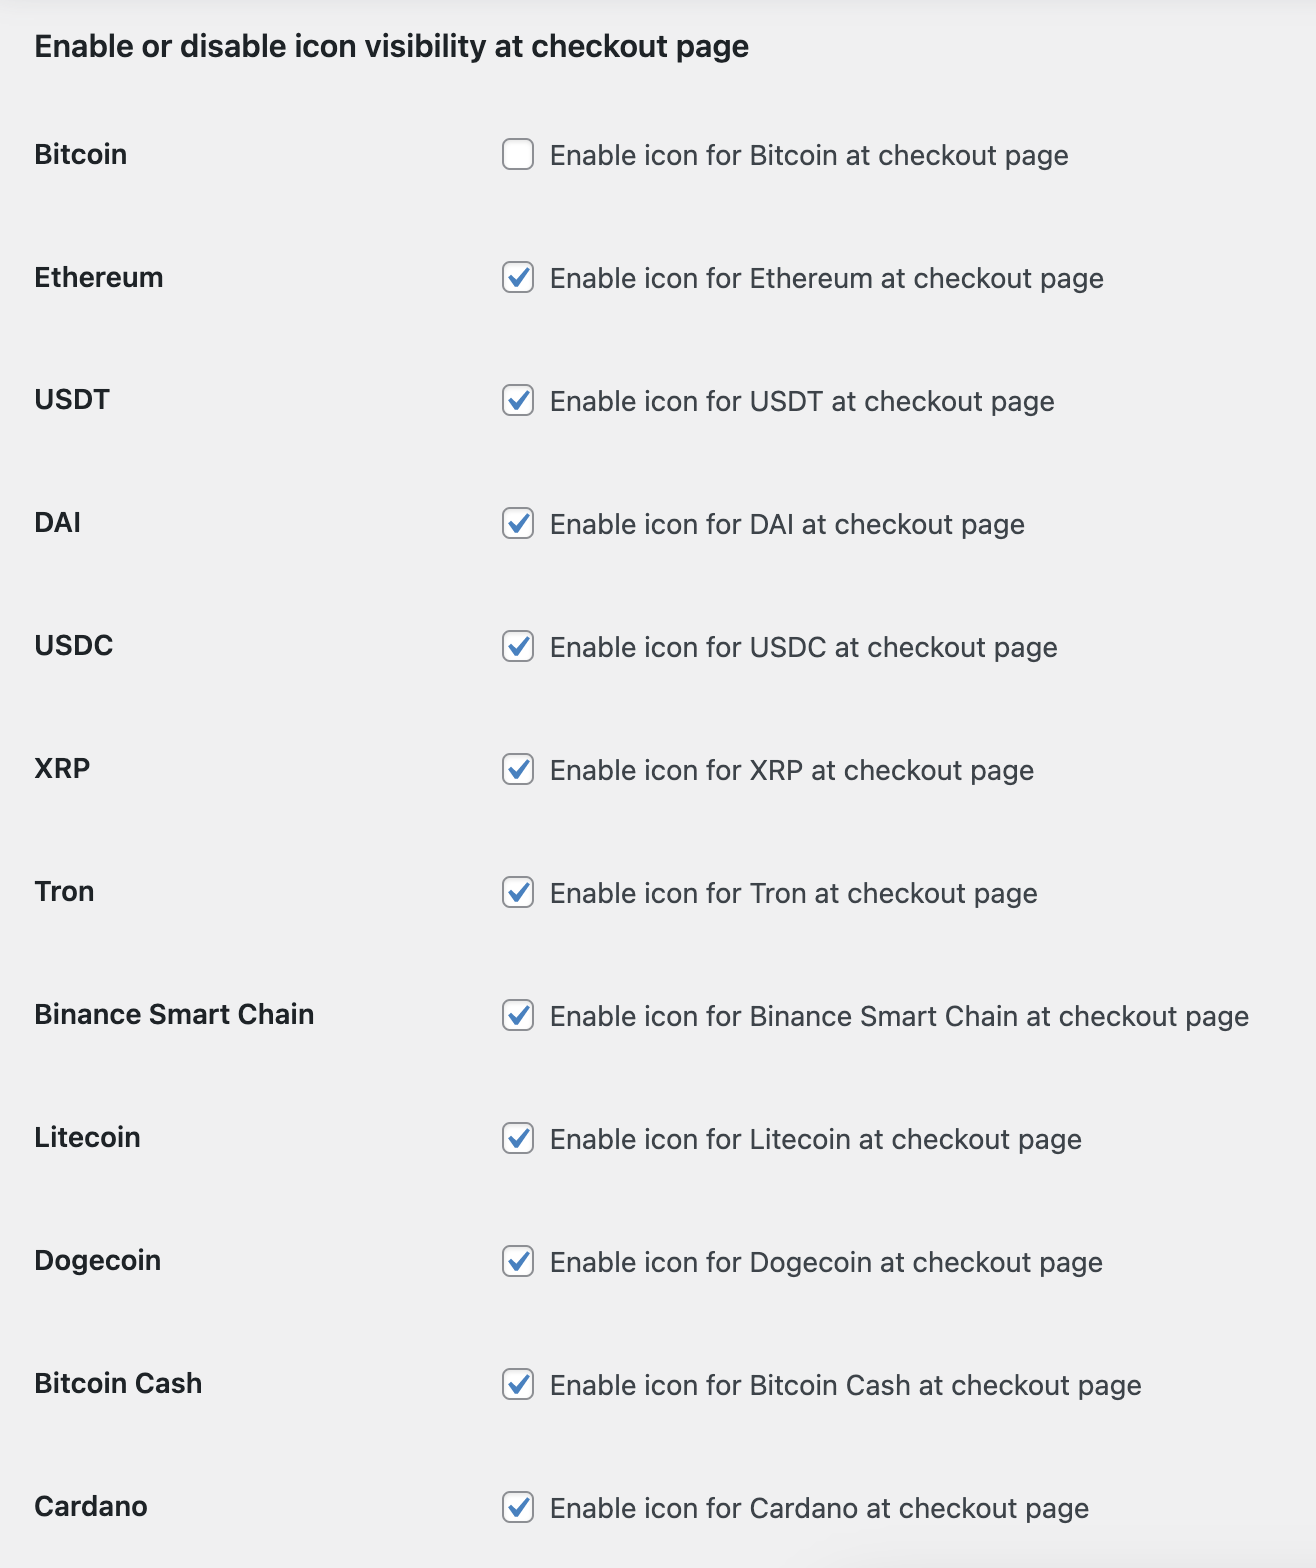 The option to choose from available cryptocurrency icons on the checkout page.